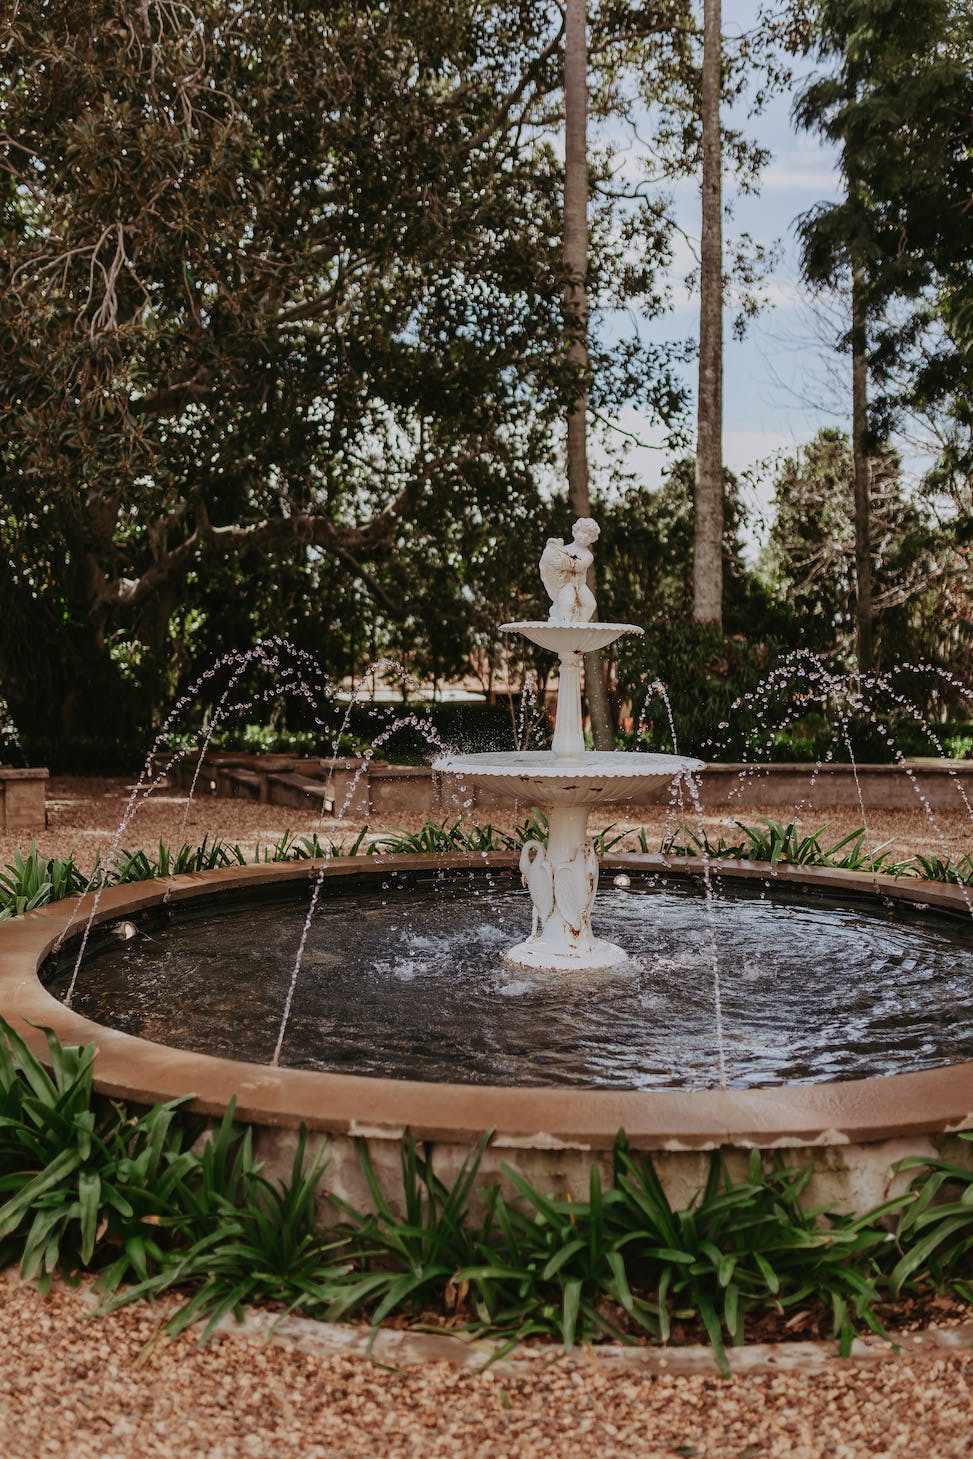 A white, tiered stone fountain with water jets sprays in a circular basin. Surrounded by lush greenery and flowers, the fountain is set against a backdrop of tall trees and a bright sky. The scene is tranquil and natural, with pathways around the fountain.